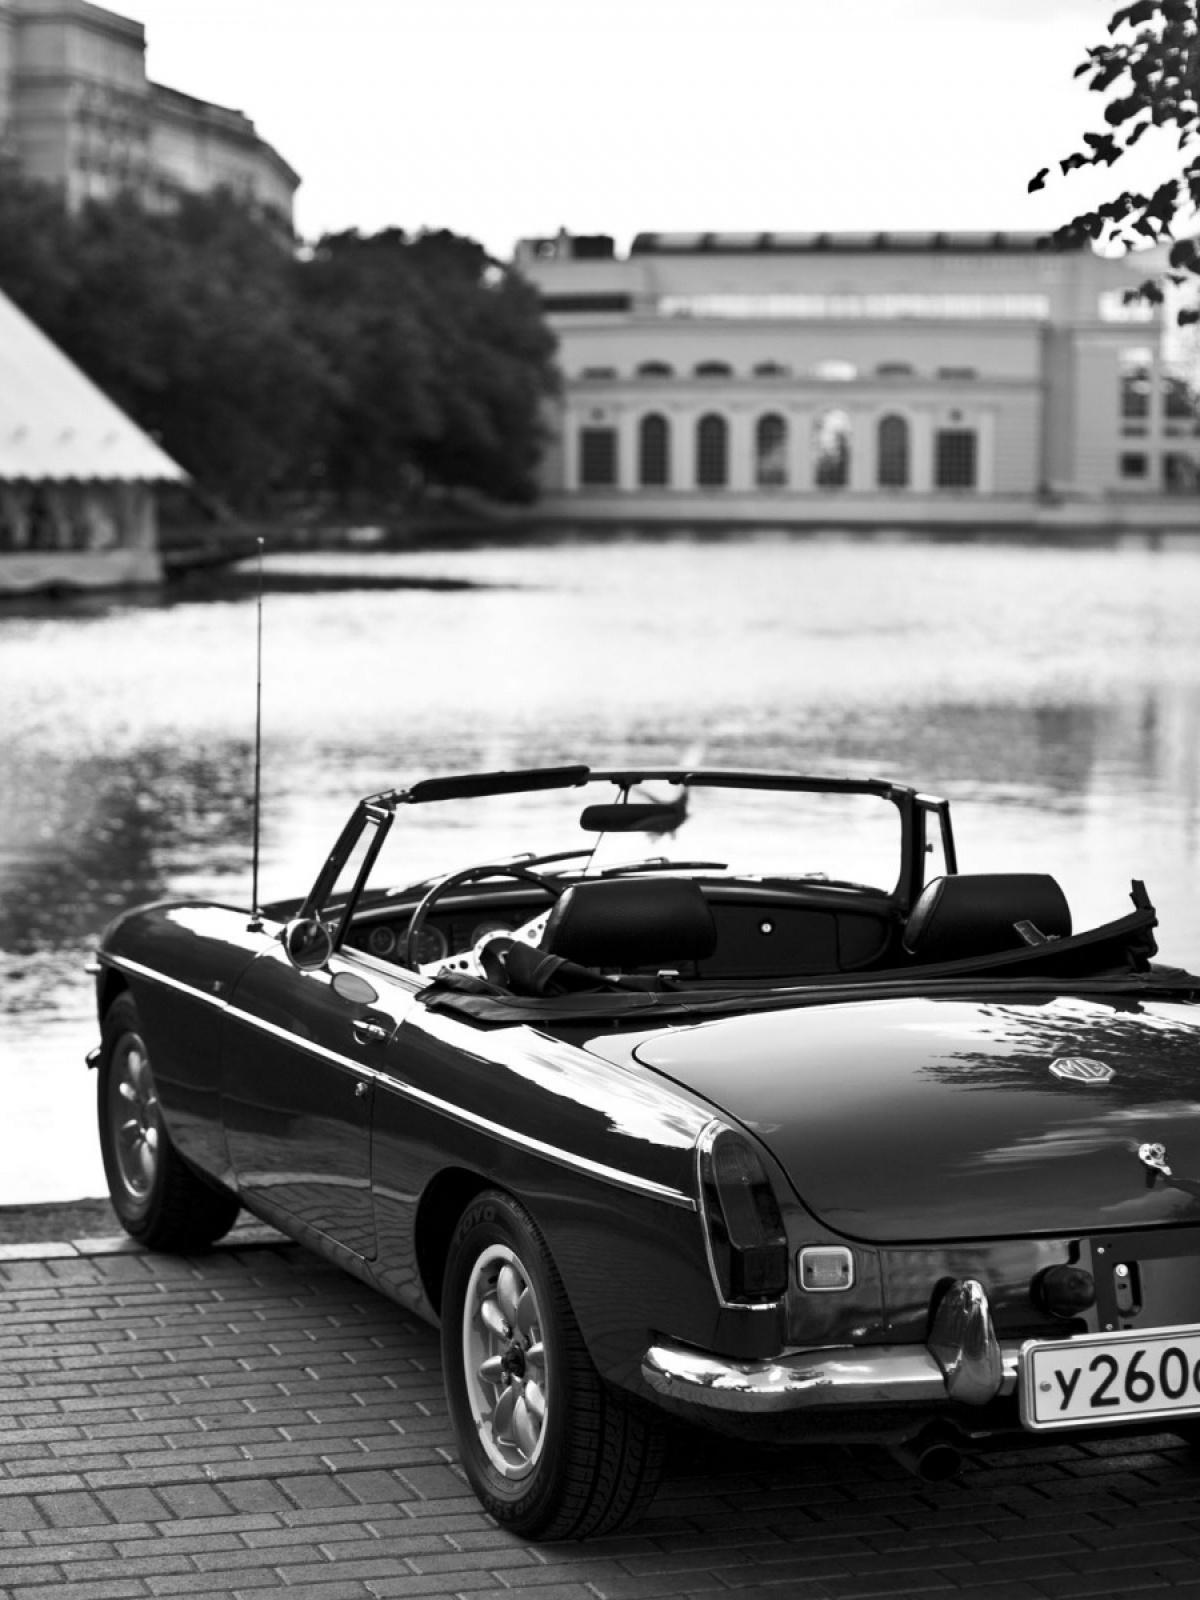 Car Android Background Car Black And White Lake Android